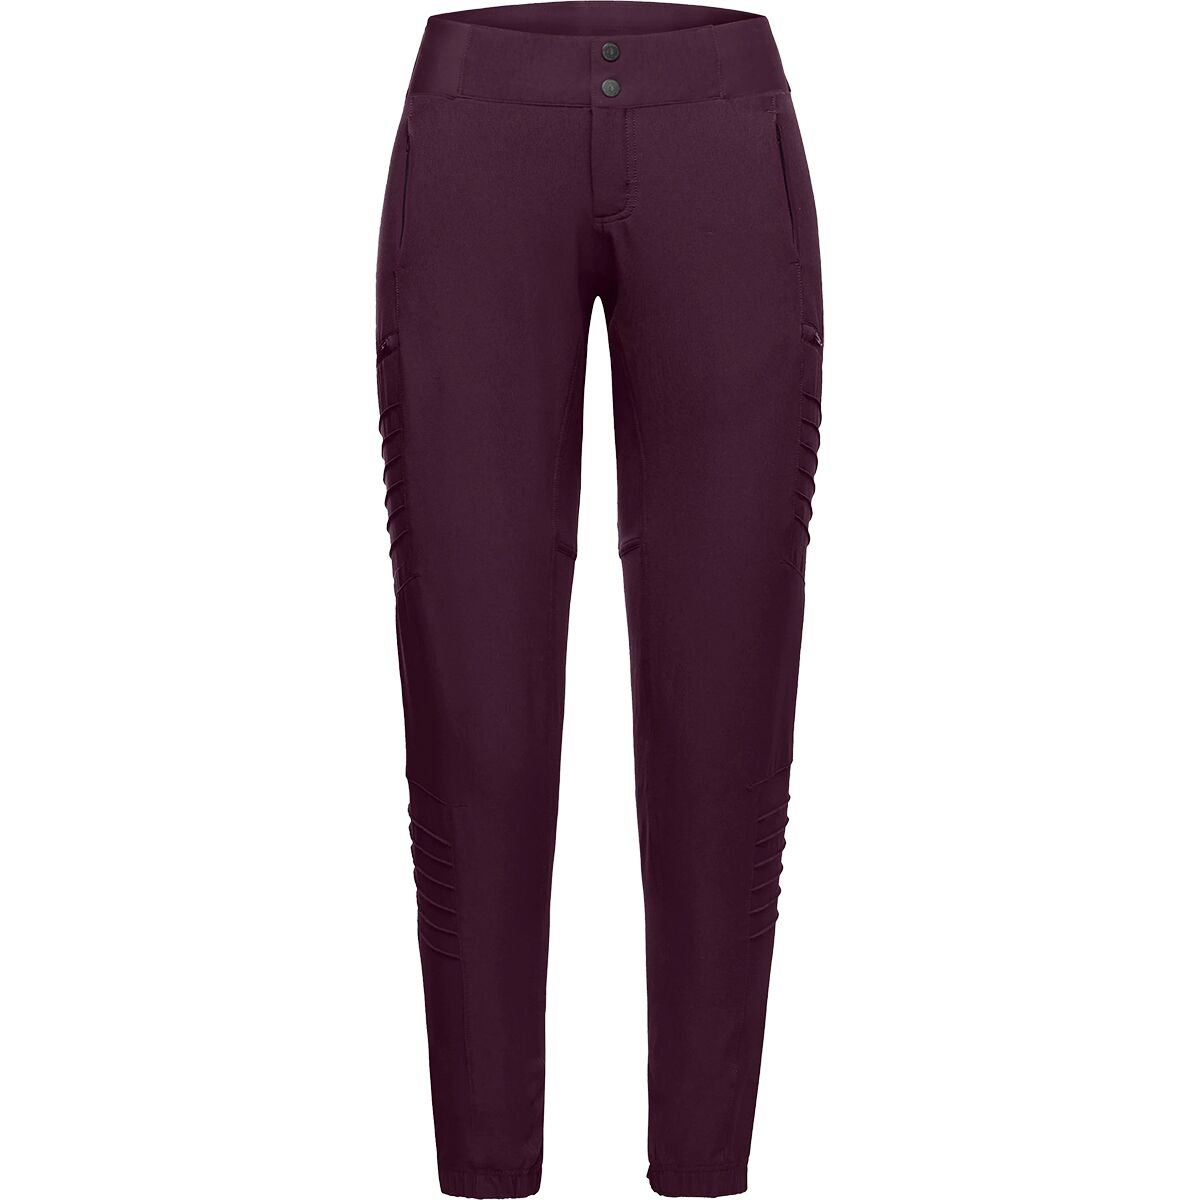 SHREDLY All Time - Zipper Snap Mid-Rise Pant - Women's